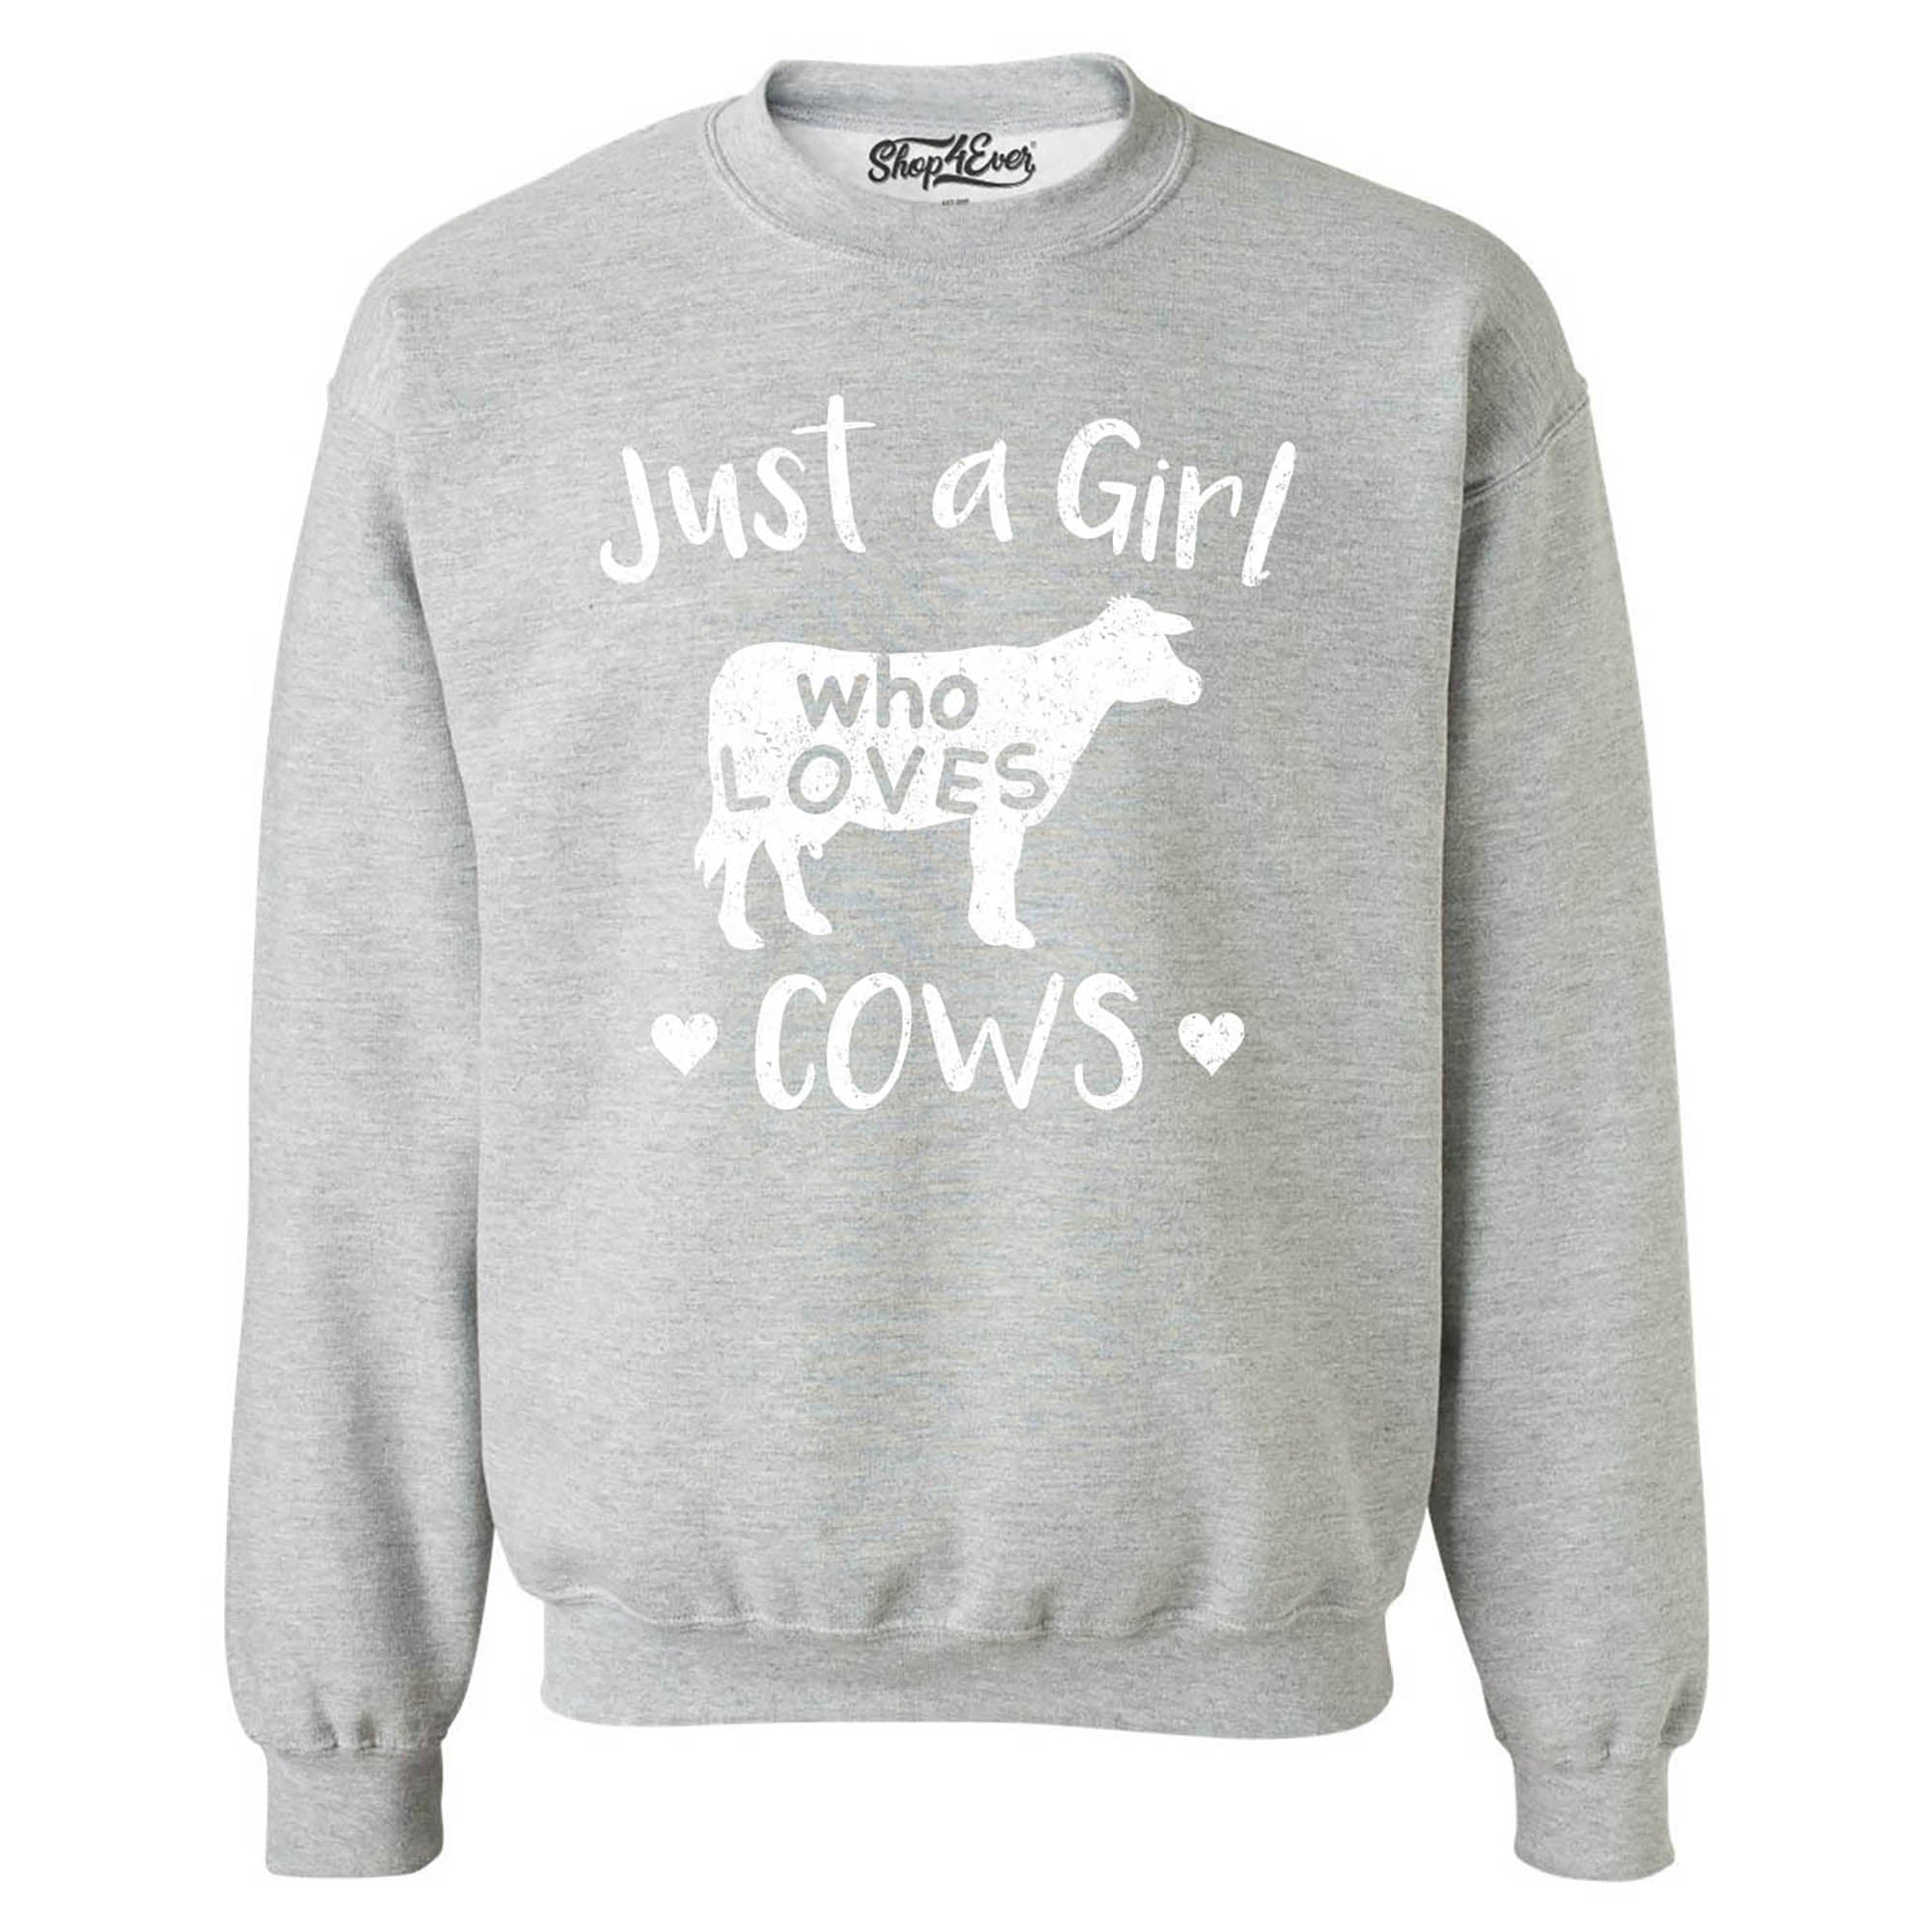 Just A Girl Who Loves Cows Crewneck Sweatshirts